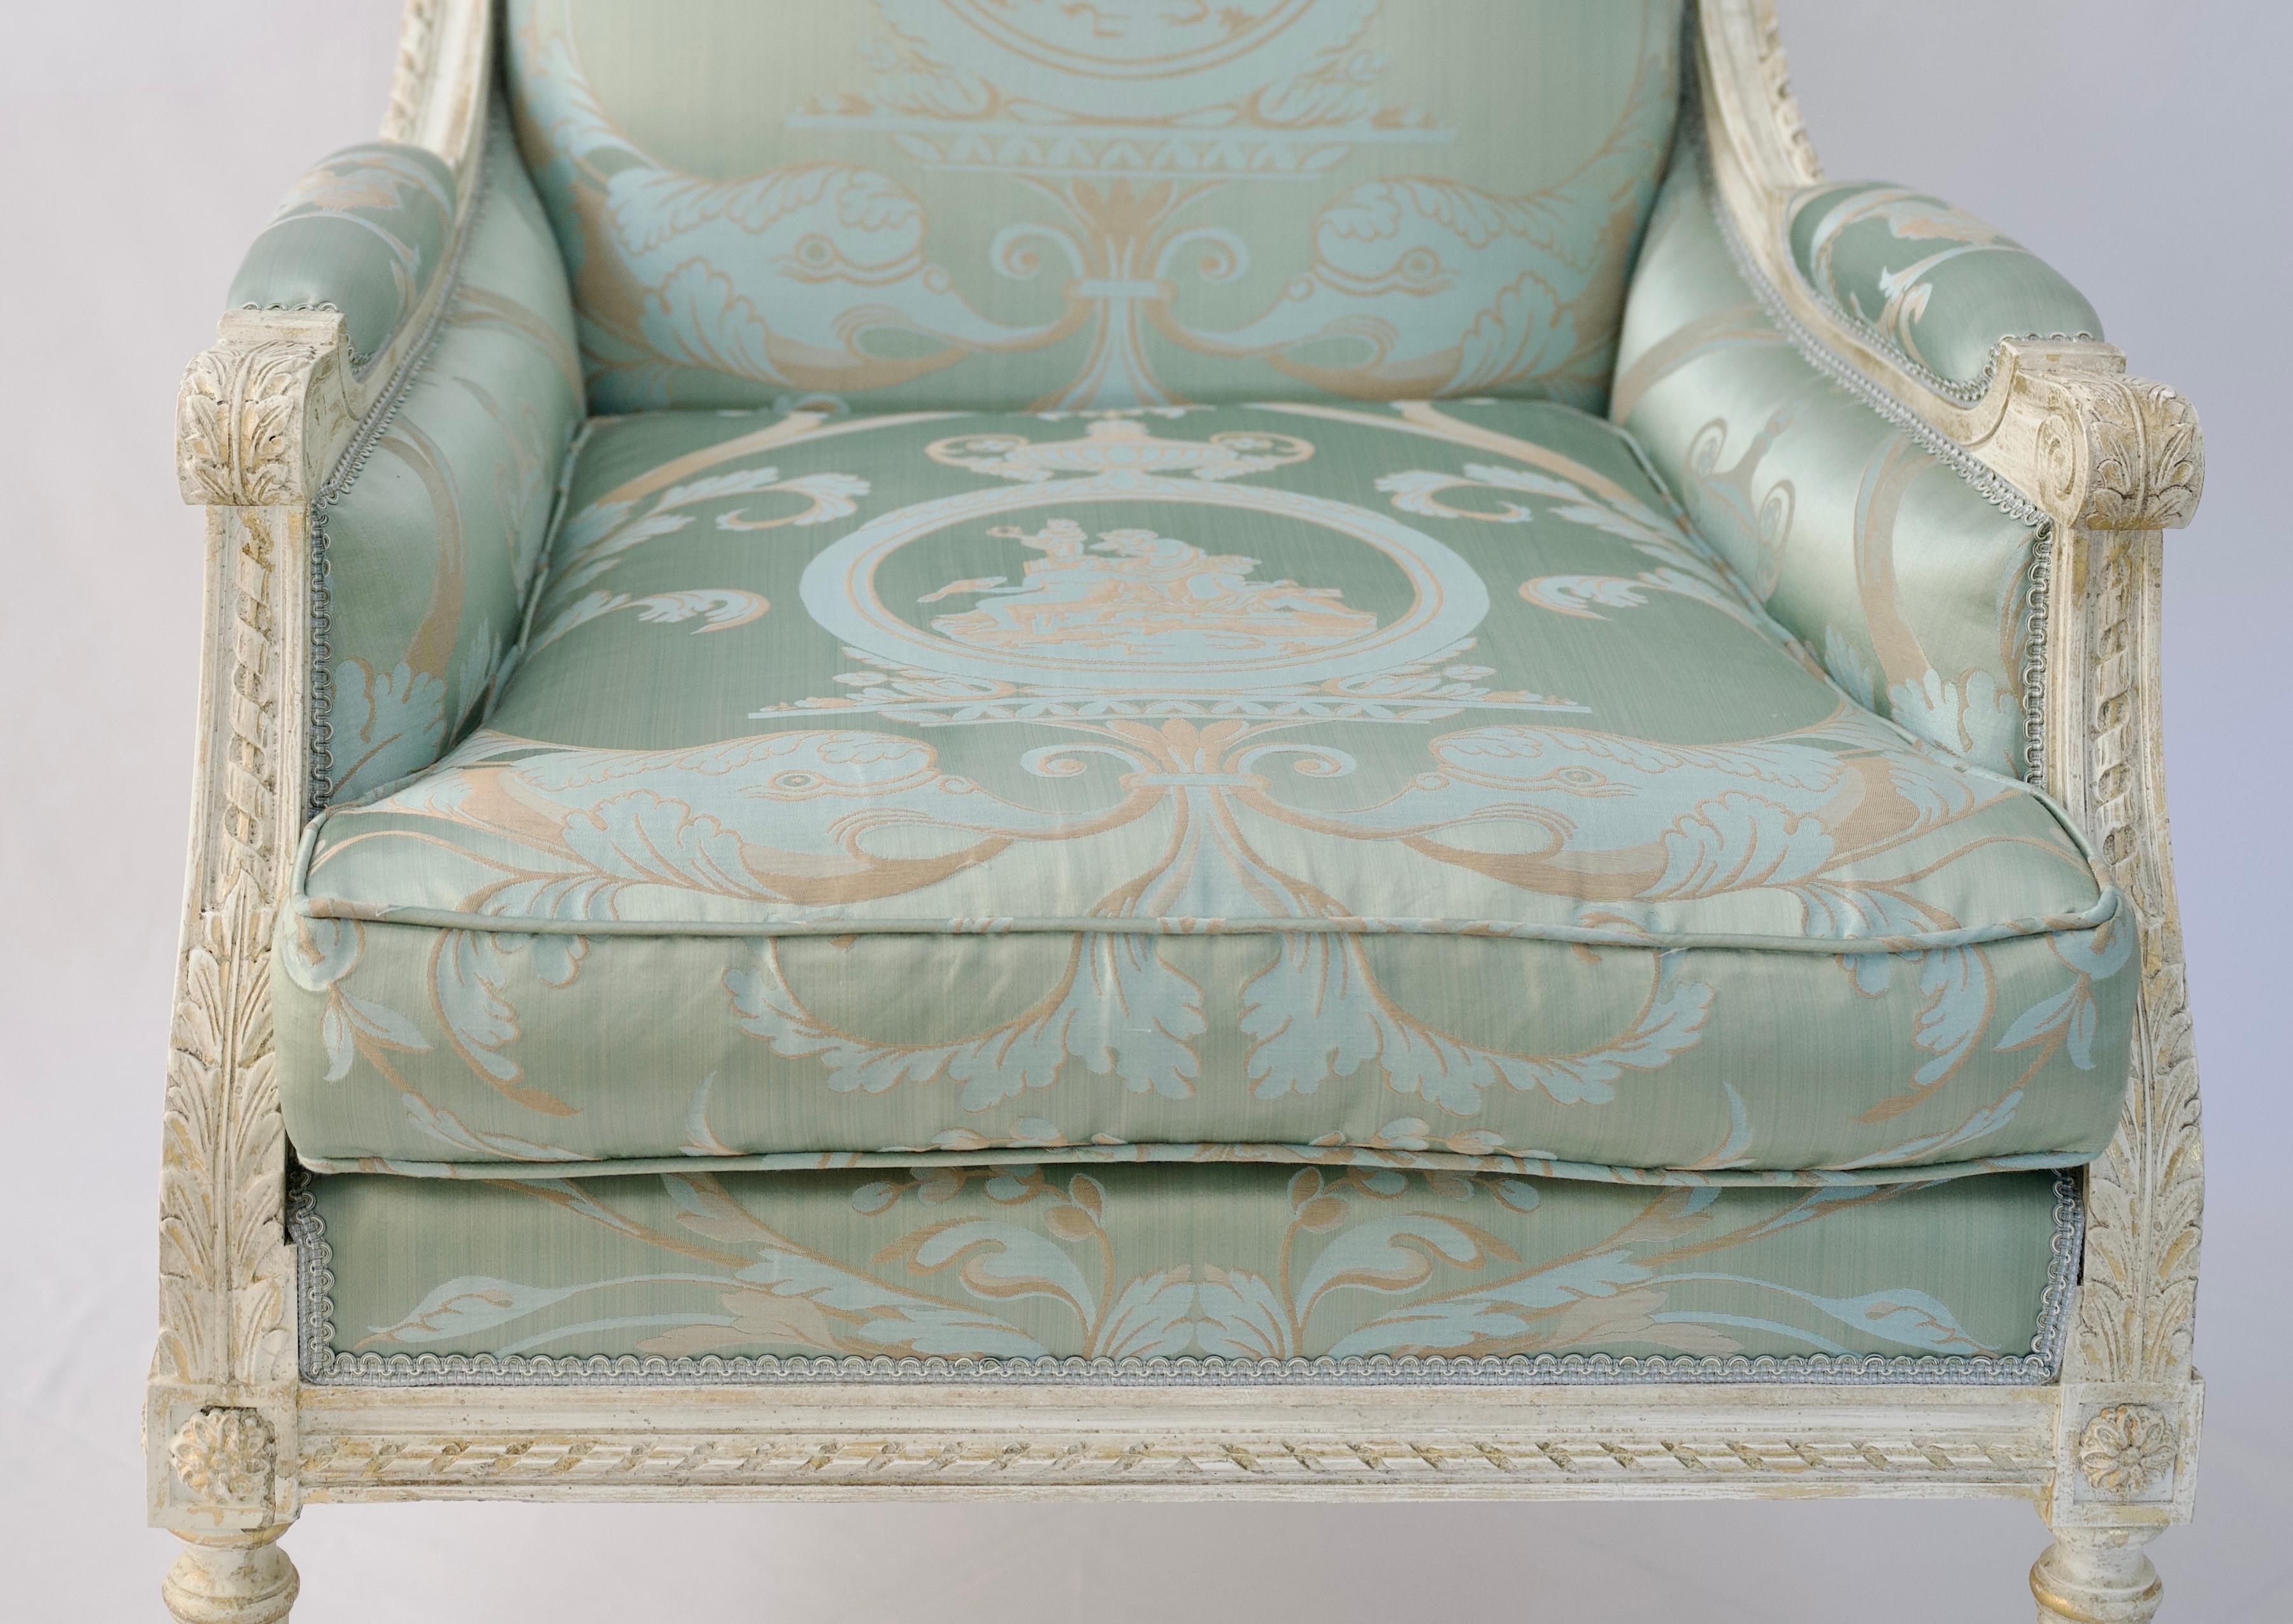 Hand-Painted Pair of French Louis XVI Style Bergère Armchairs with Lelievre Fabric